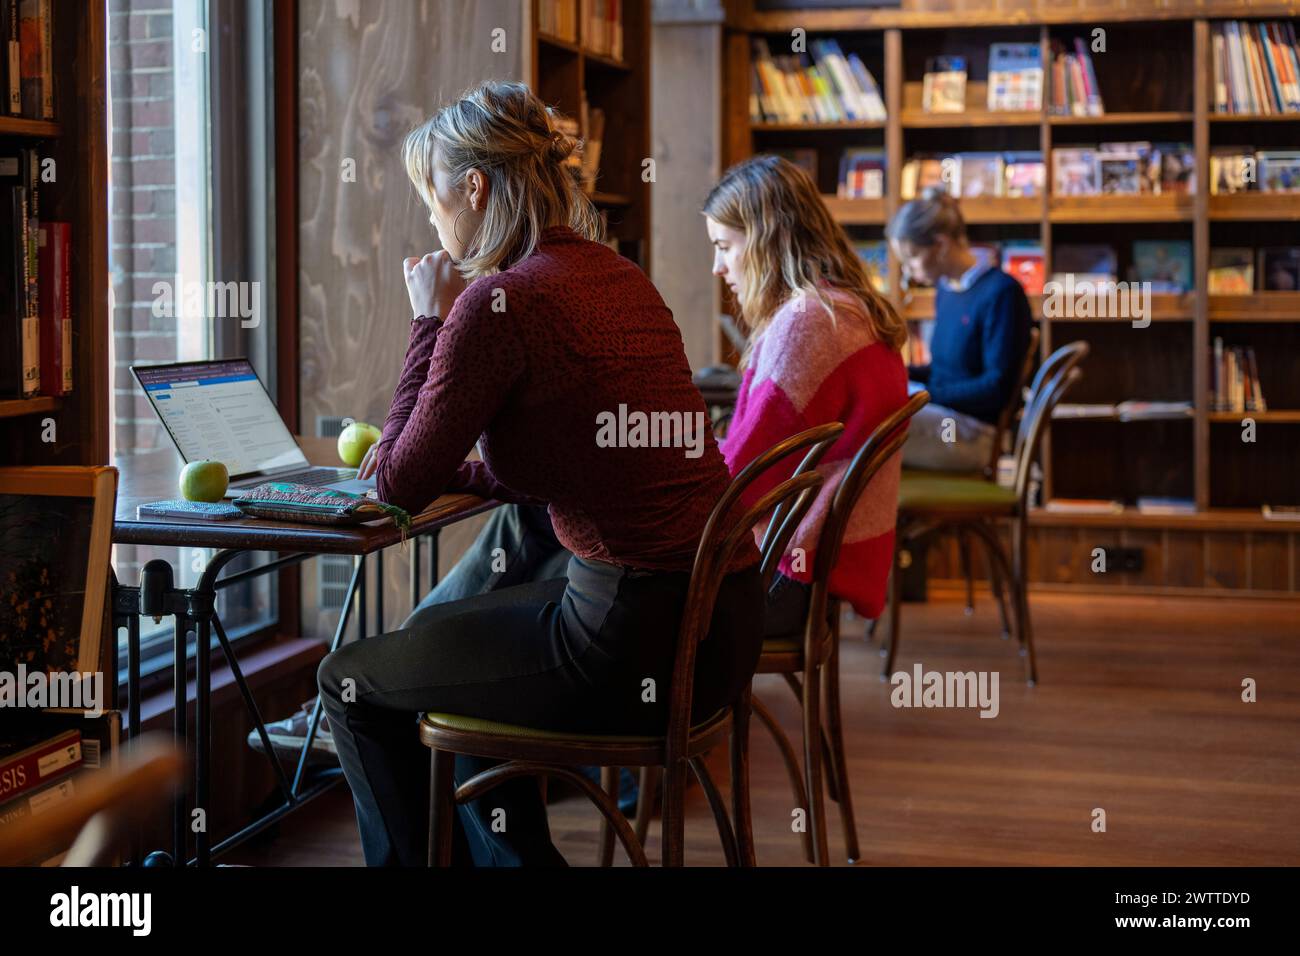 Studious atmosphere as individuals concentrate on their work in a cozy library setting. Stock Photo